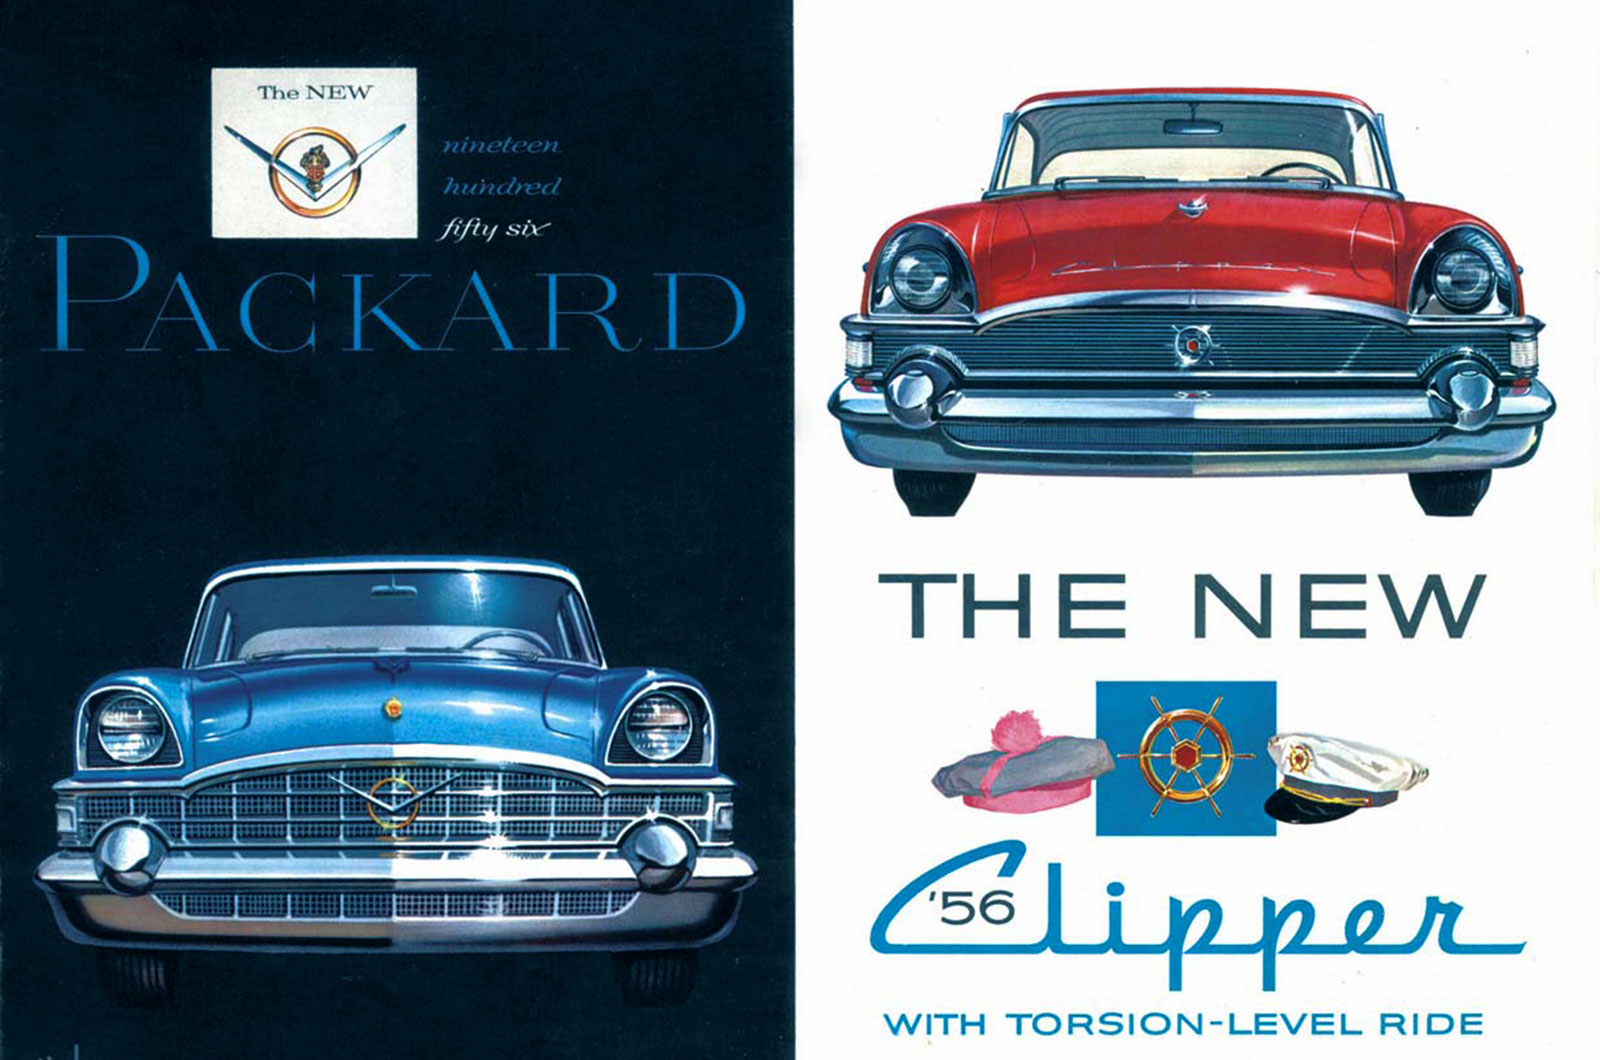 <p>The introduction of power locking isn’t very well documented, but it seems that <strong>Packard</strong> was there first, introducing a power door lock system on its 1956 range. Today, it is present on virtually every car on sale.</p><p><strong>GROUNDBREAKER SCORE: 7 </strong>– very useful.</p>